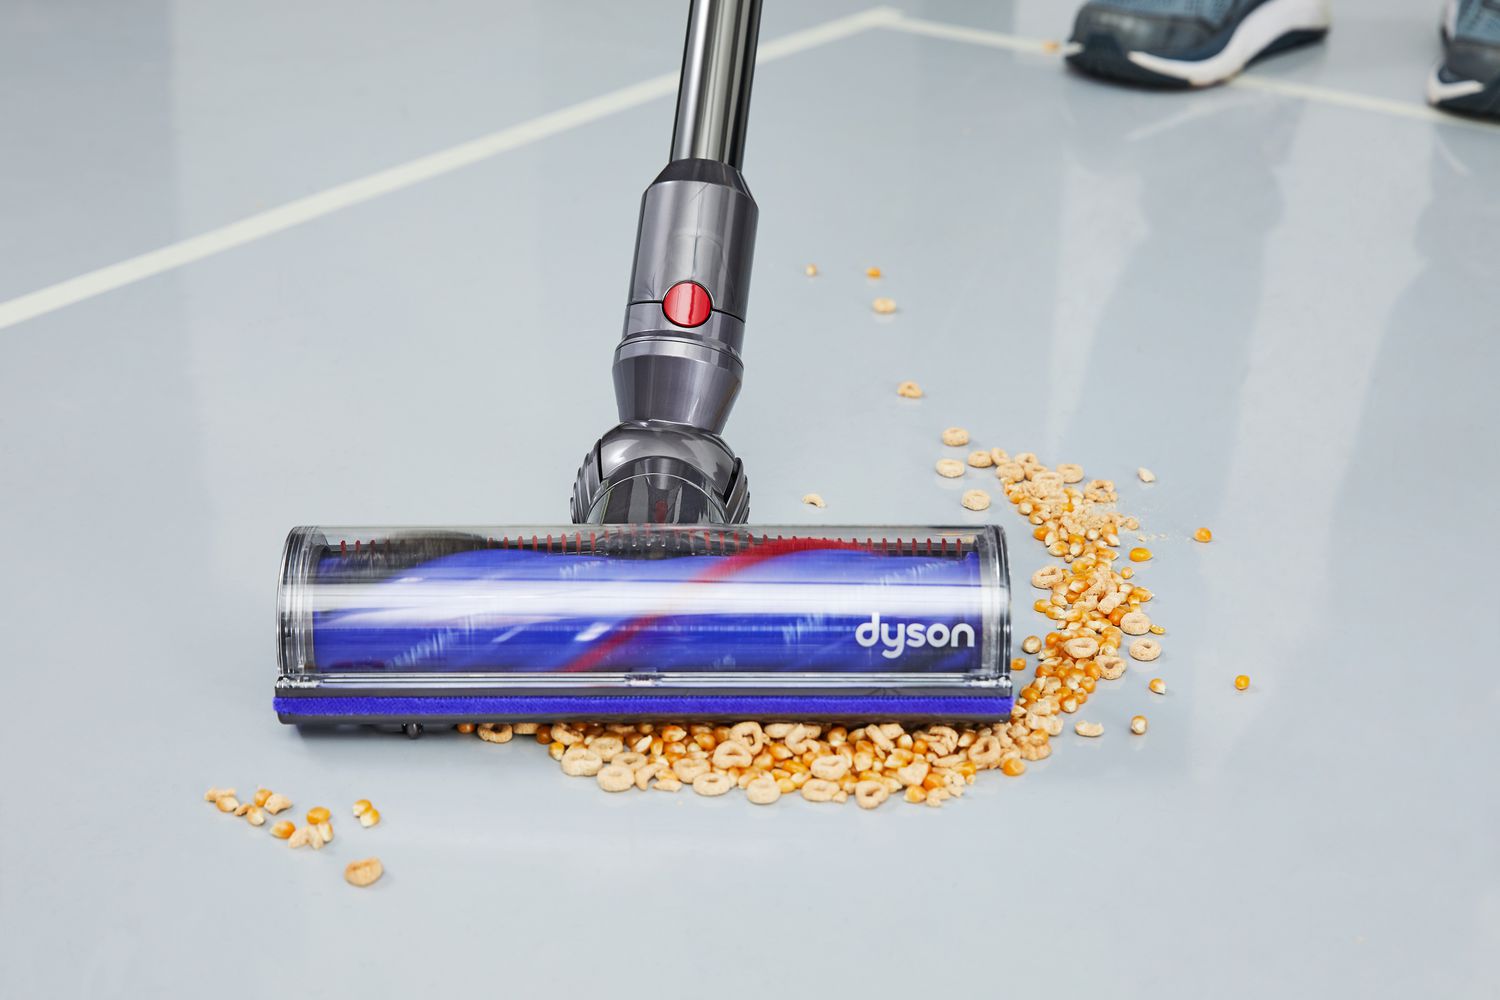 Dyson V12 Detect Slim cleaning cheerios and popcorn kettles off the floor